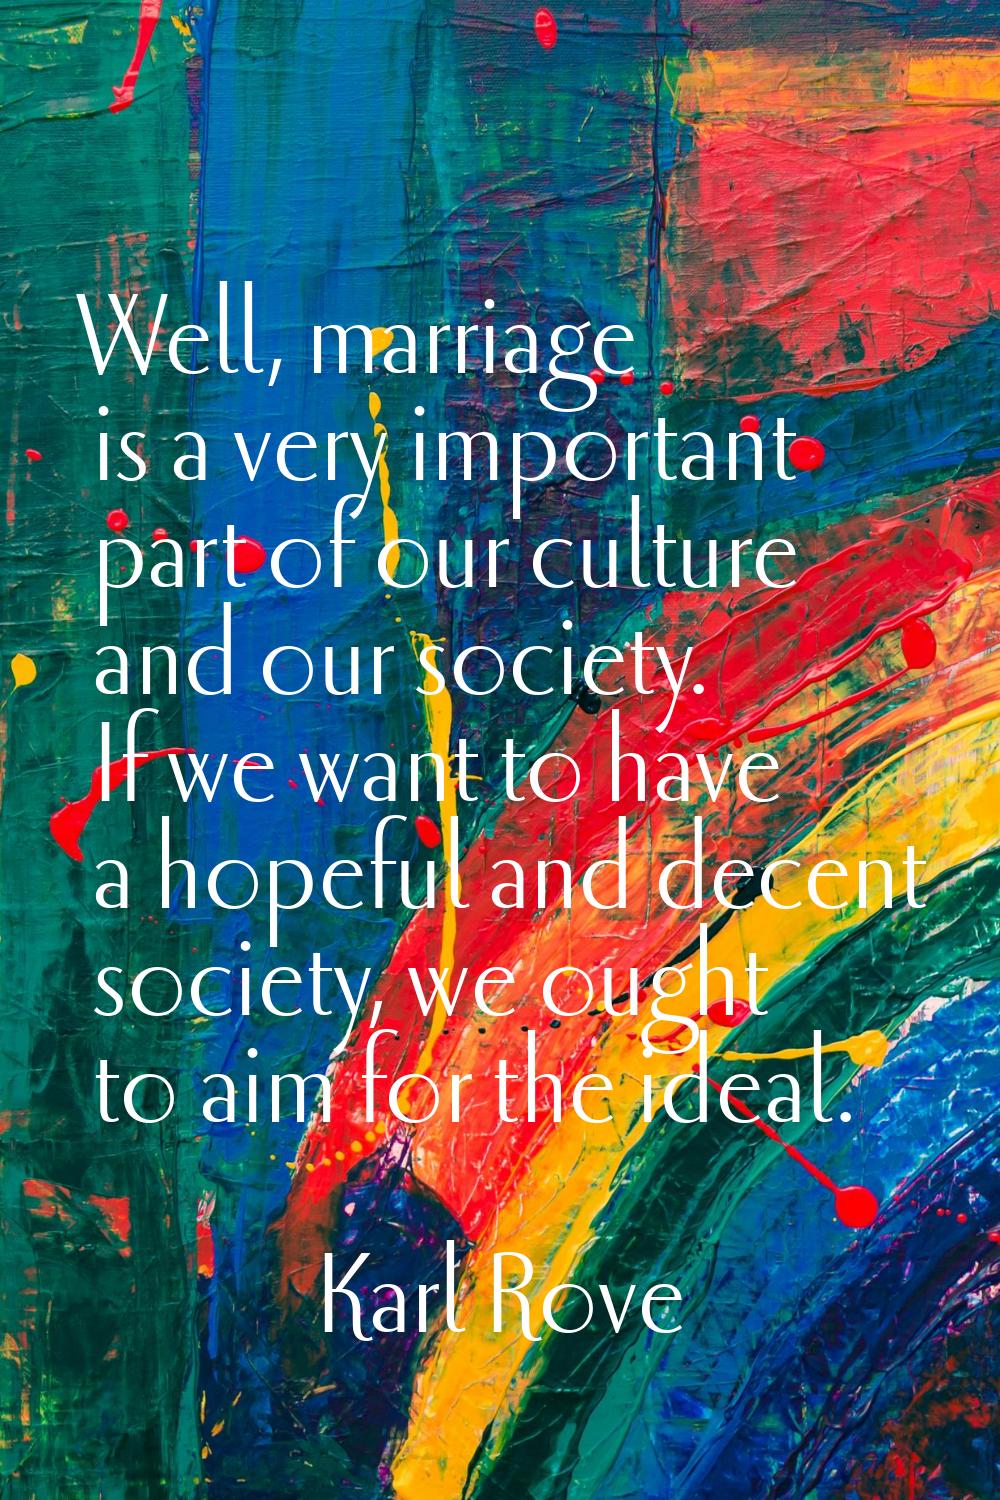 Well, marriage is a very important part of our culture and our society. If we want to have a hopefu